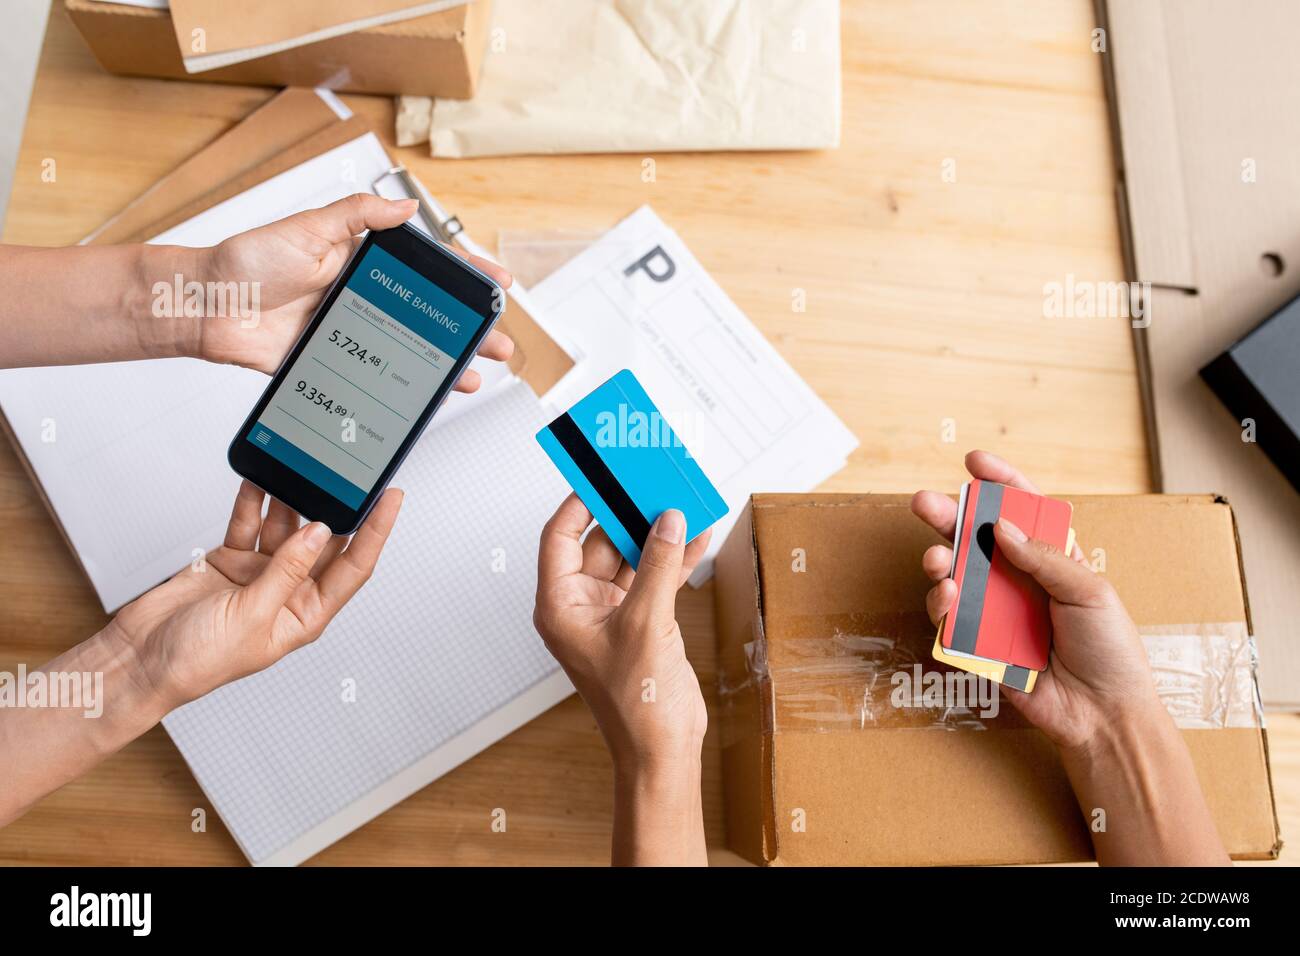 Overview of hands of two female managers holding smartphone and plastic cards Stock Photo